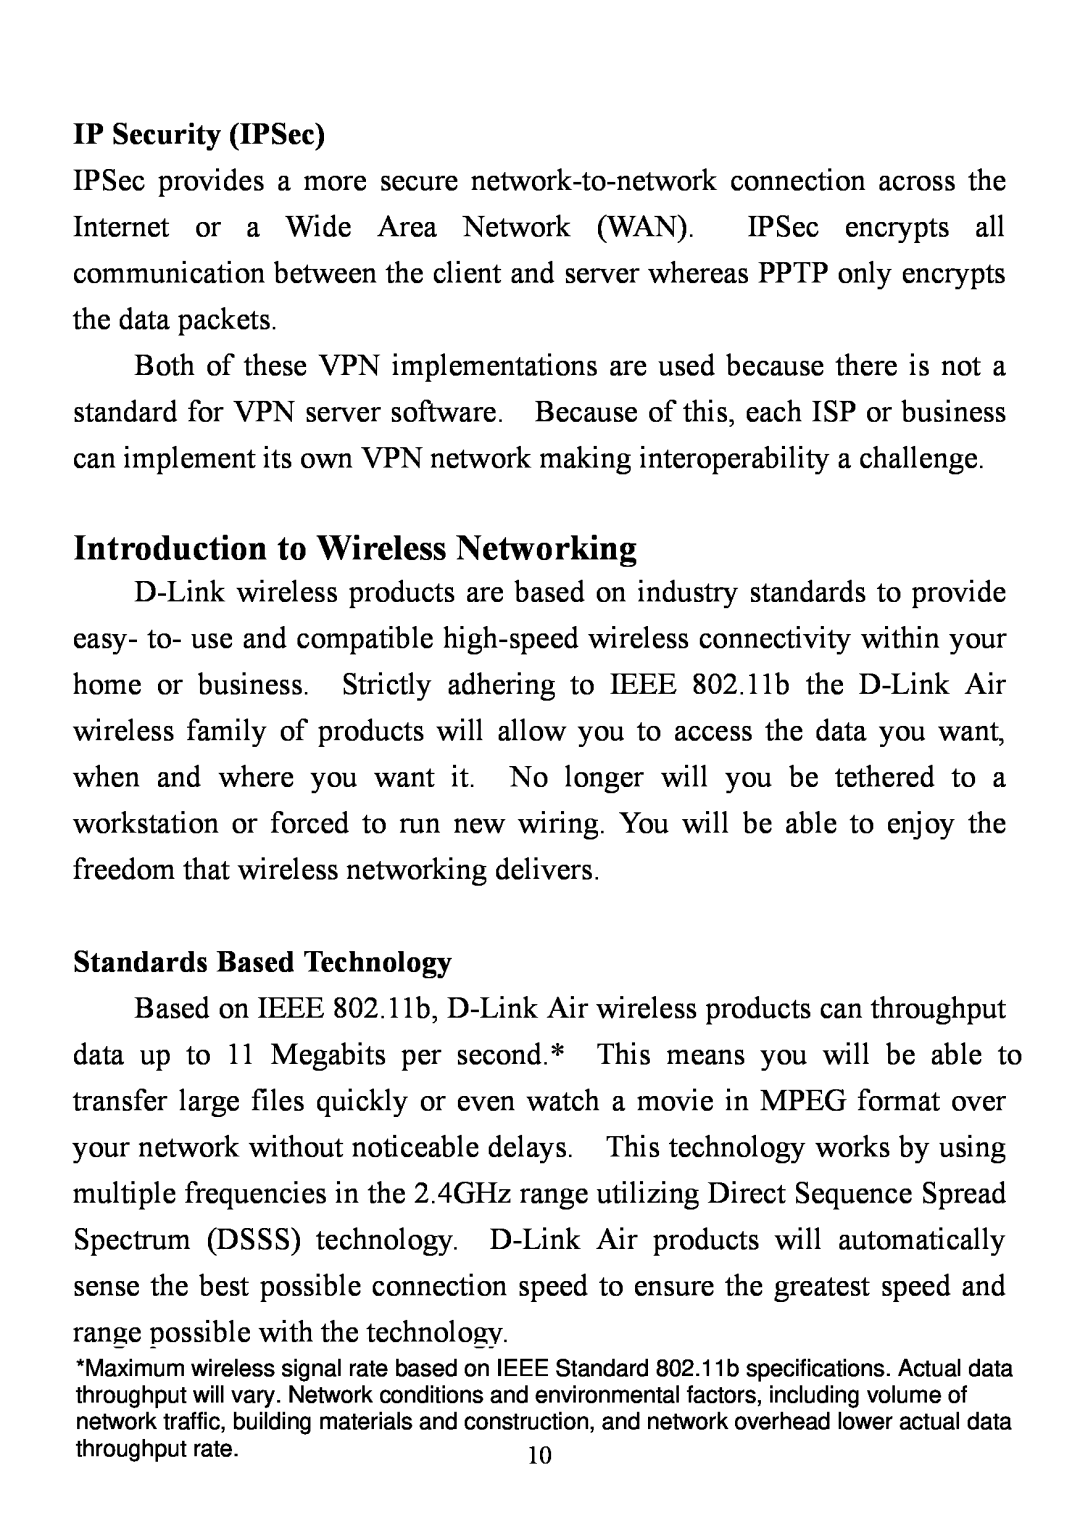 D-Link DI-714 user manual Introduction to Wireless Networking, IP Security IPSec, Standards Based Technology 